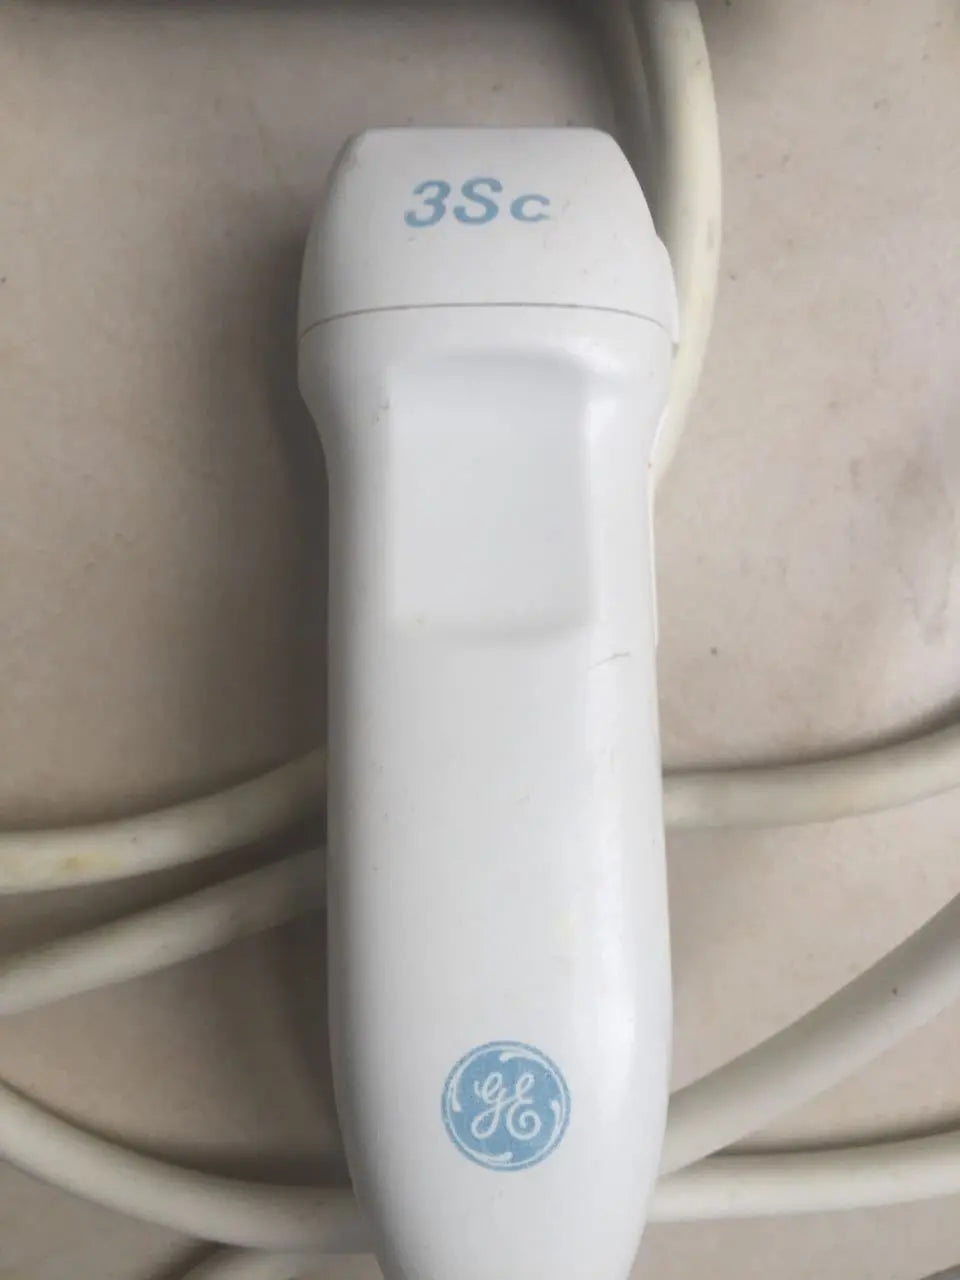 GE 3SC-RS ULTRASOUND PROBE DIAGNOSTIC ULTRASOUND MACHINES FOR SALE